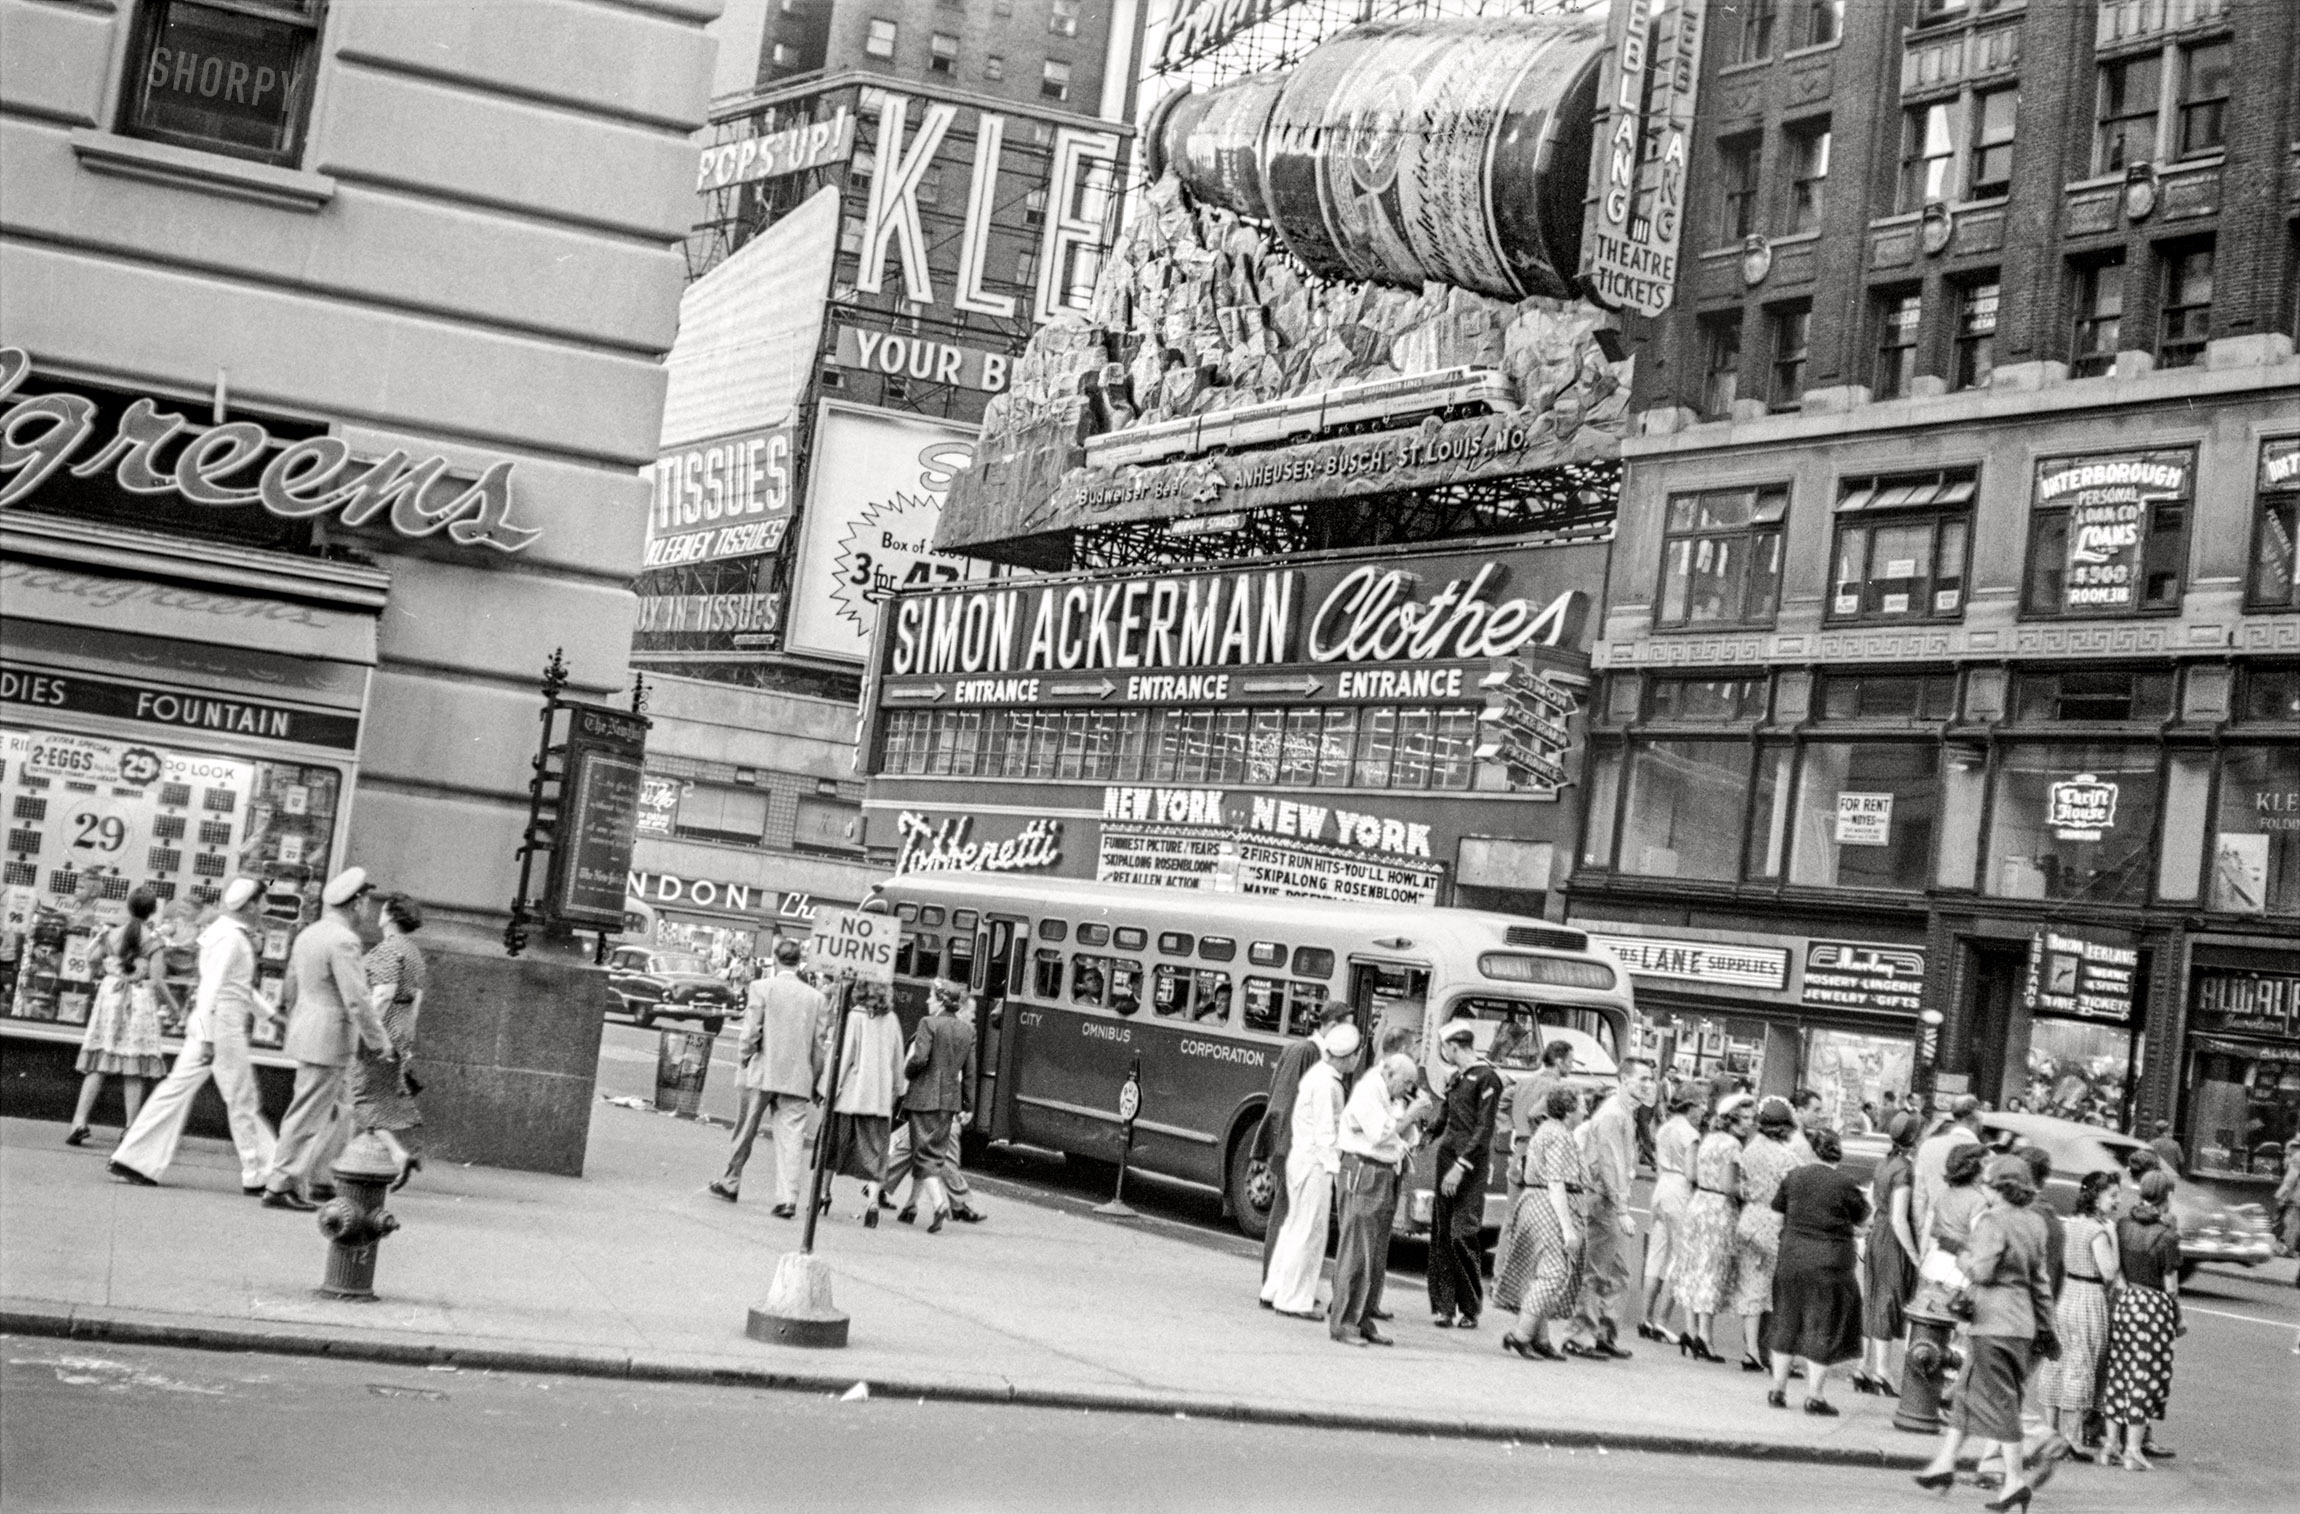 June 1951. "Times Square street scene." Now playing at the New York Theatre: Skipalong Rosenbloom. 35mm acetate negative by Angelo Rizzuto. View full size.